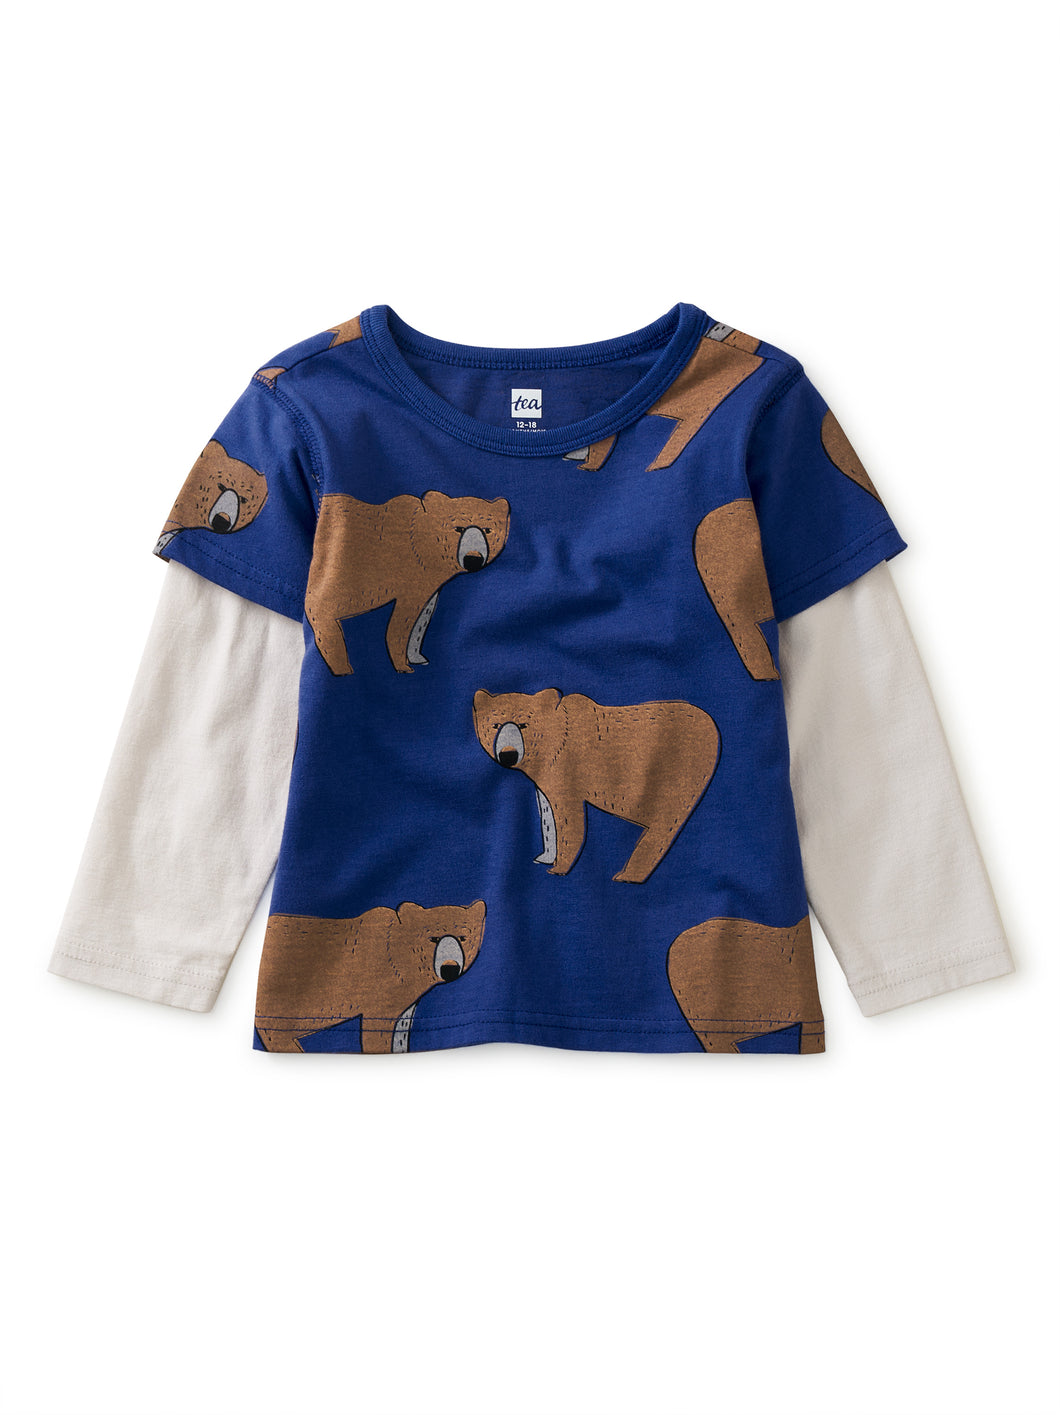 Tea Collection Baby Layered Long Sleeve Graphic Tee - Bear Lair